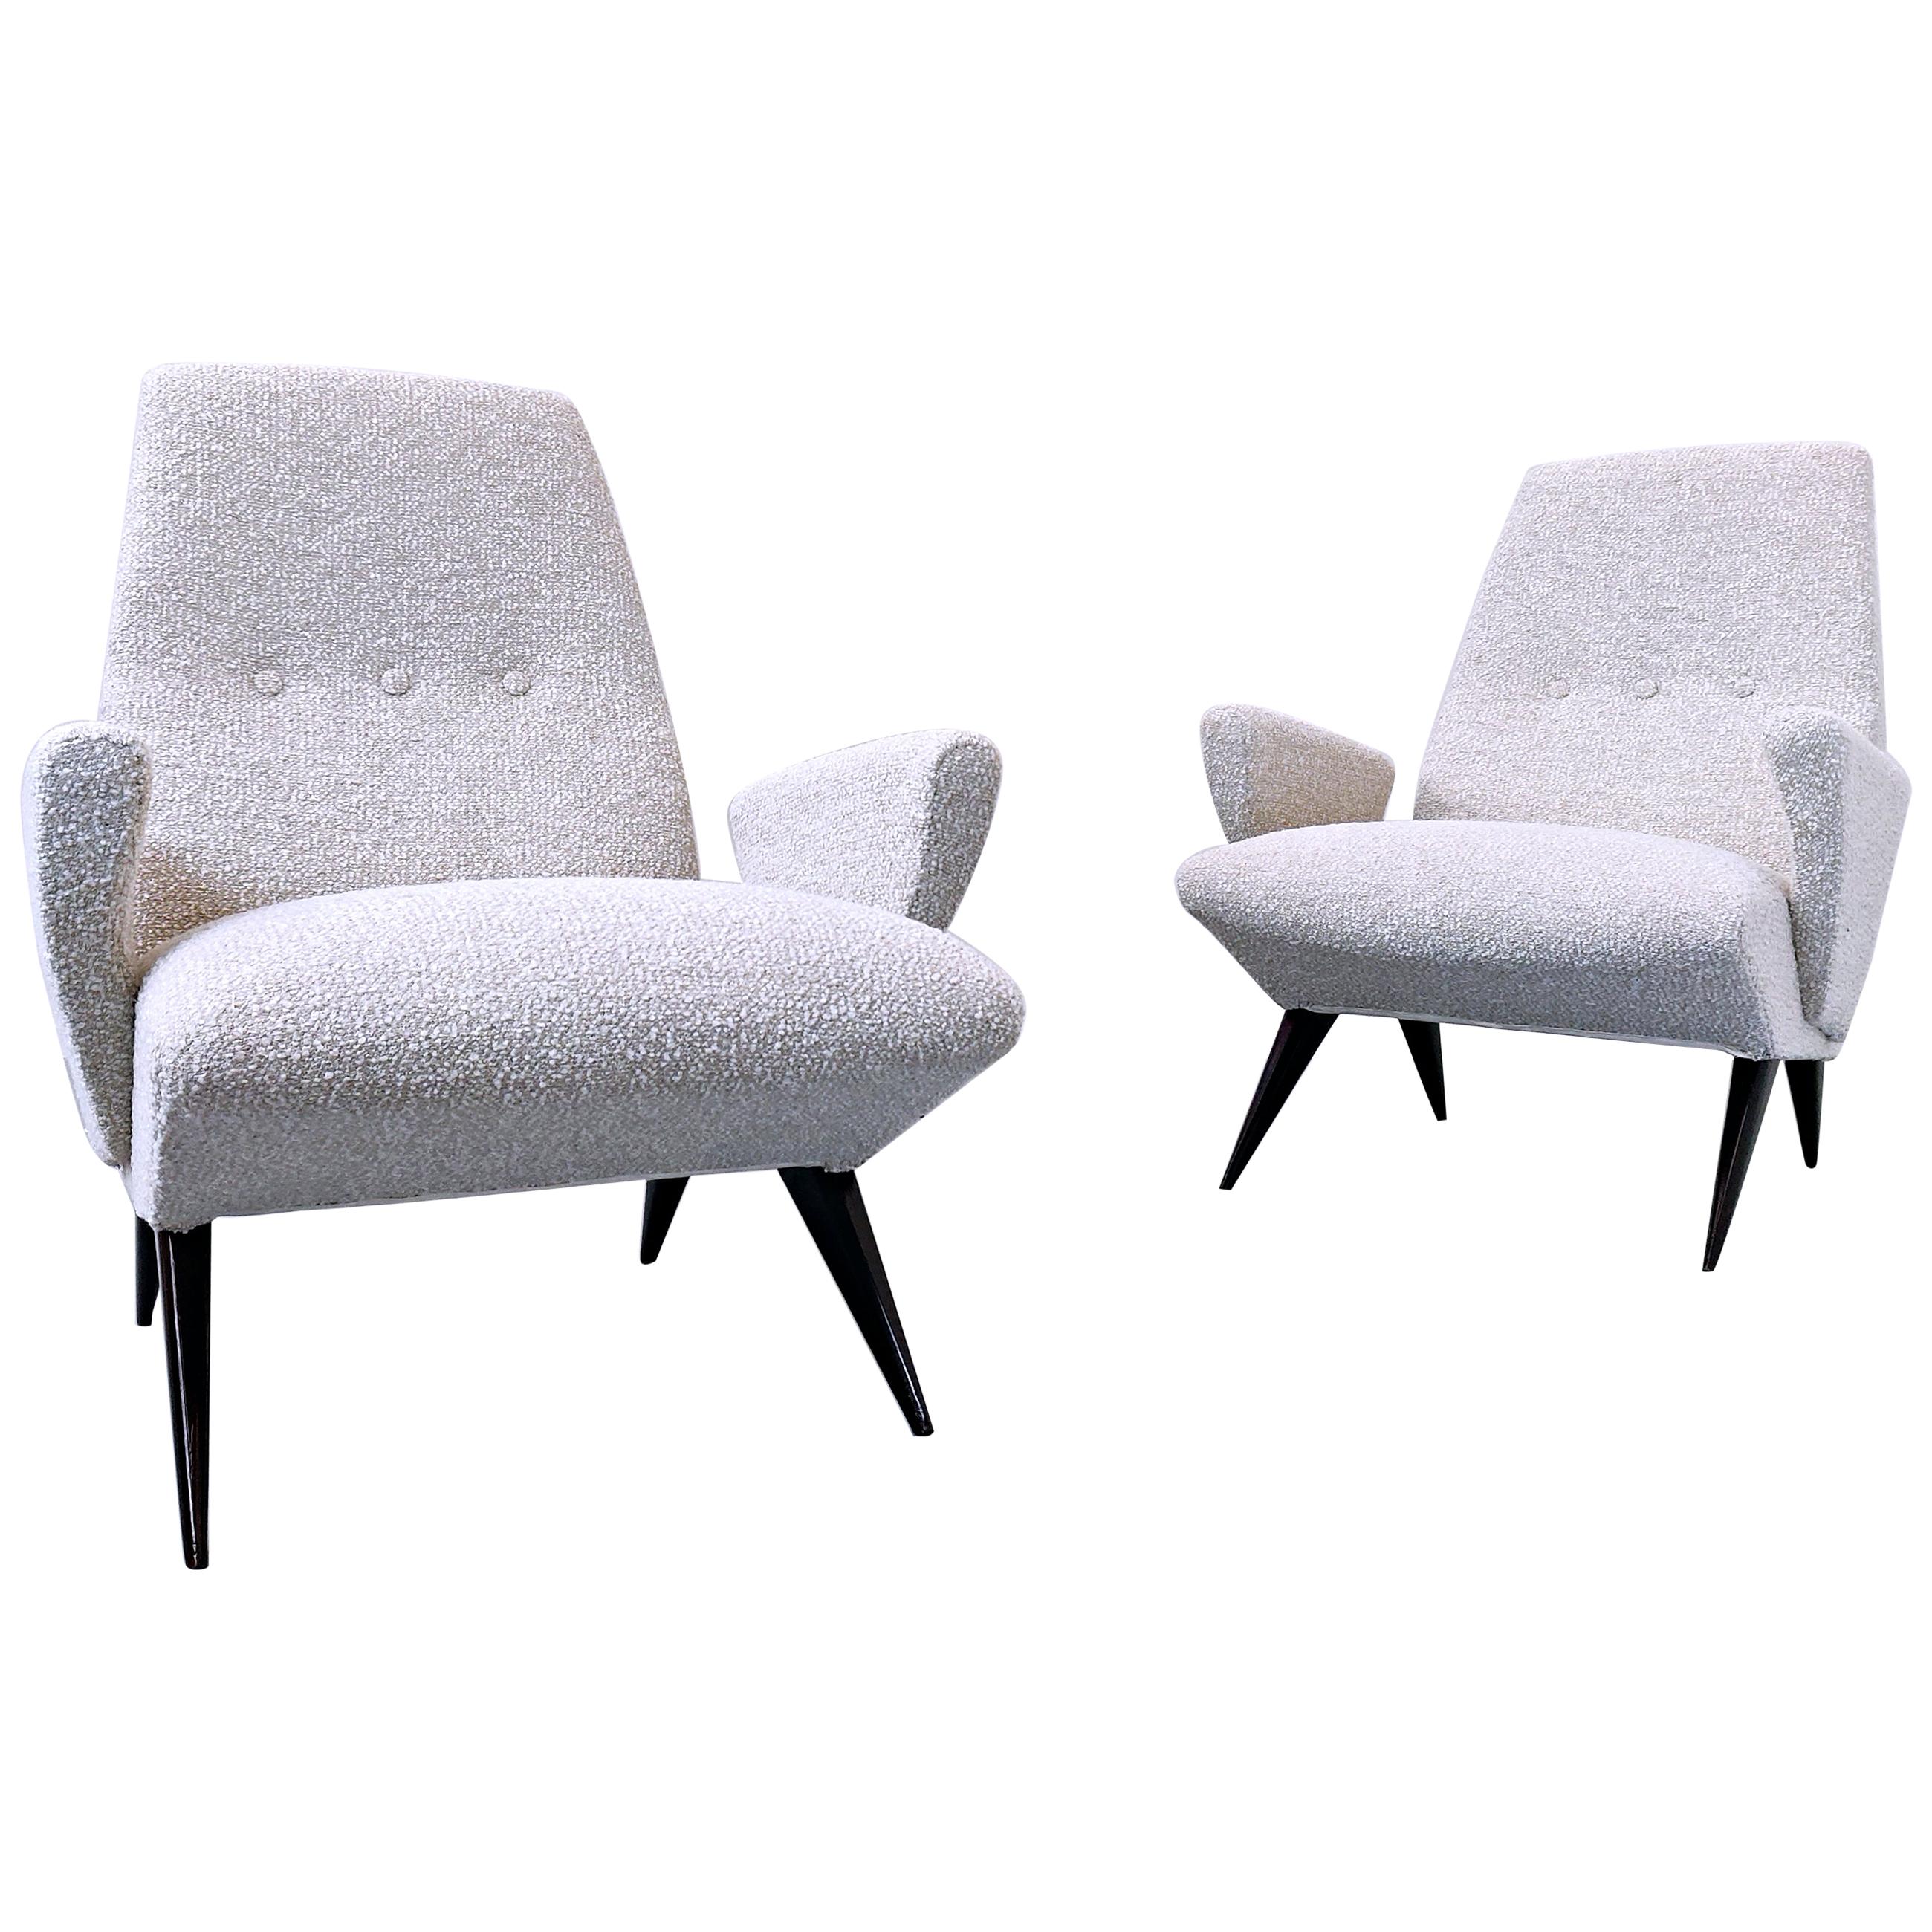 Pair of Mid-Century Modern  Armchairs by Nino Zoncada for Frimar, Italy 